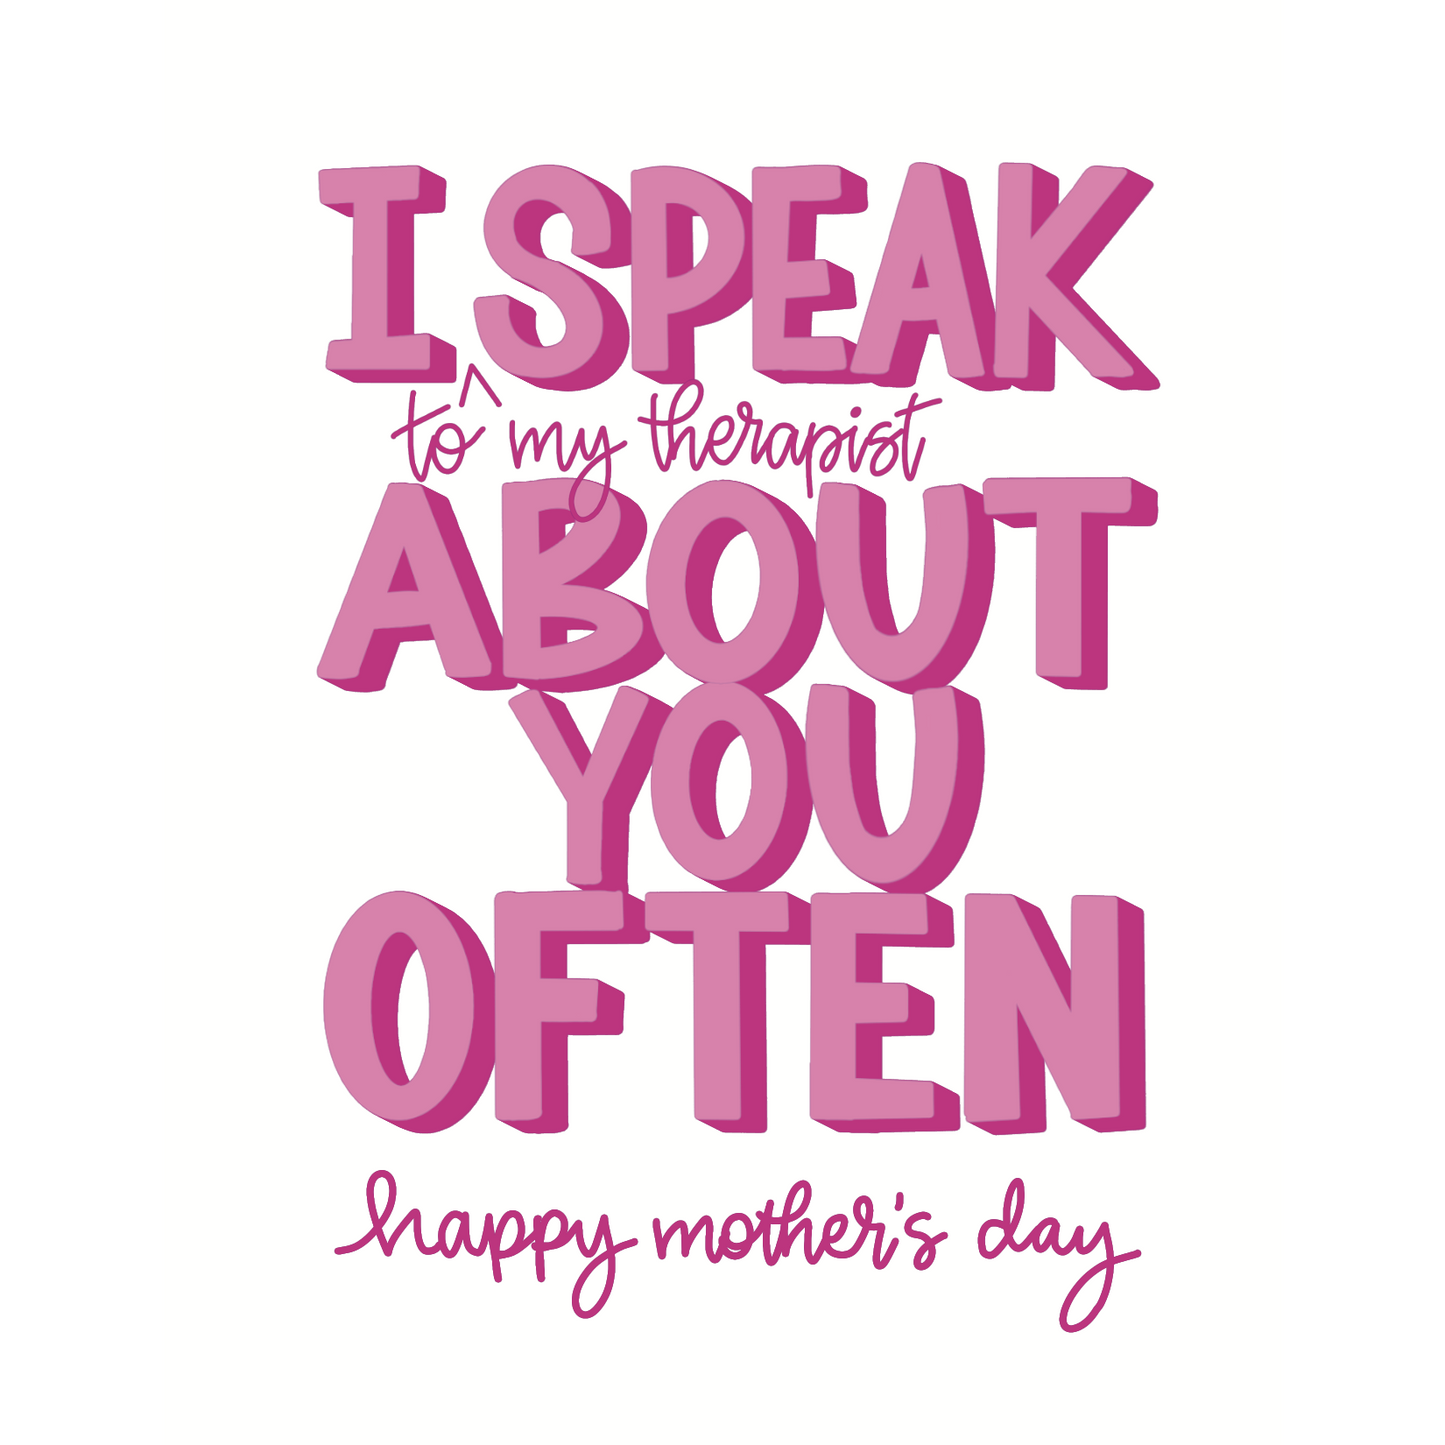 I Speak (to my therapist) About You Often - Mother's Day Card | mom, funny card, mom's day